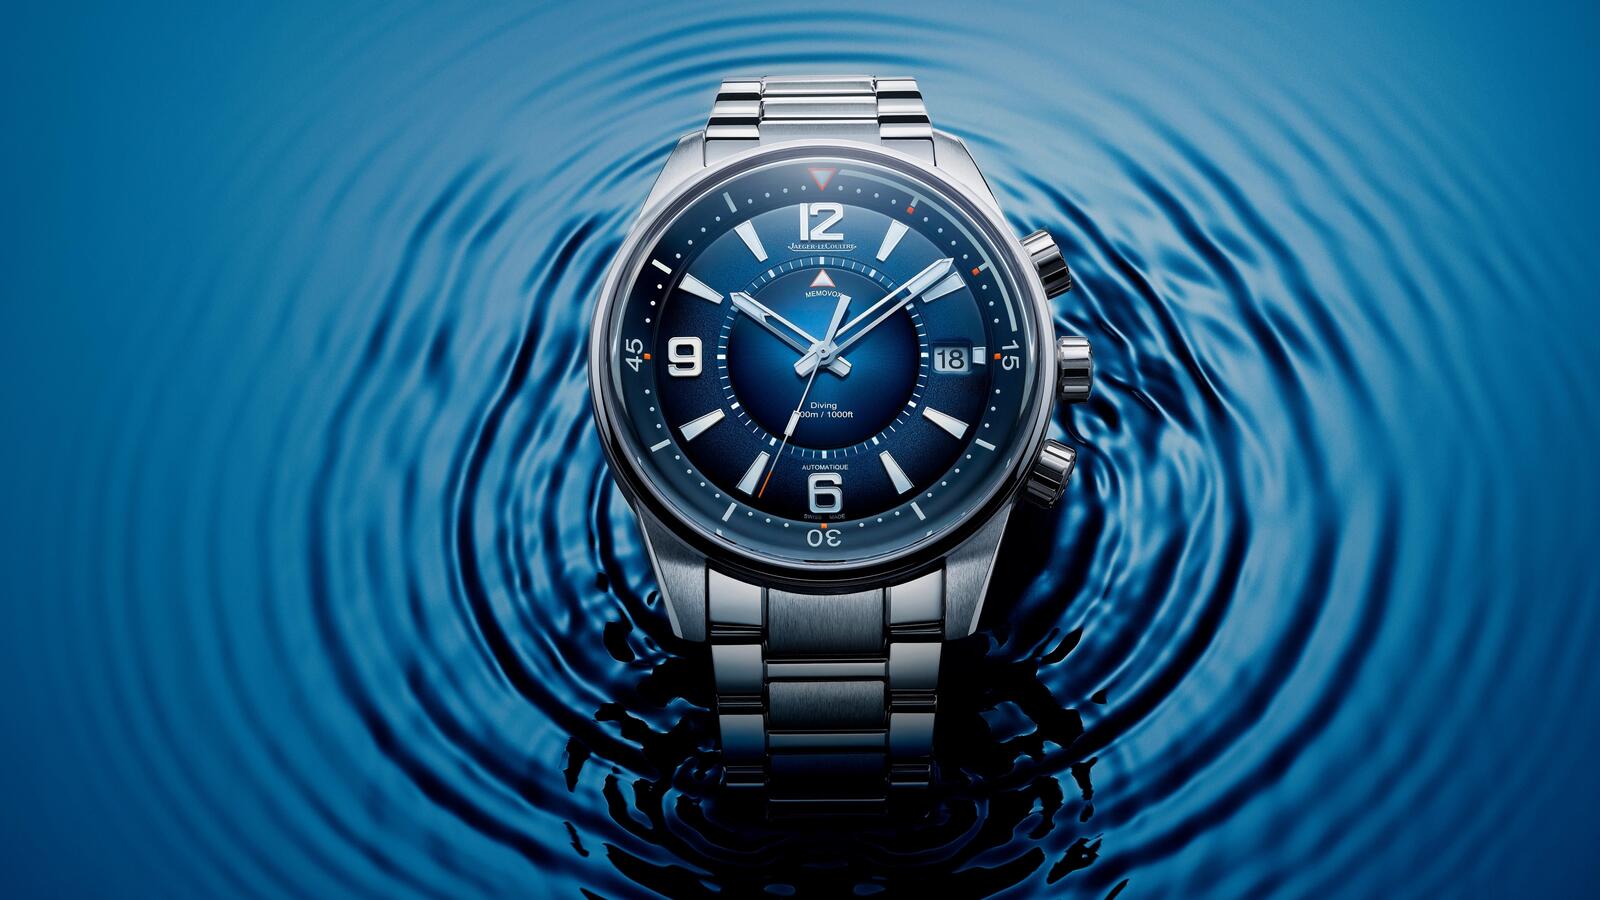 Free photo jaeger-lecoultre watches in water